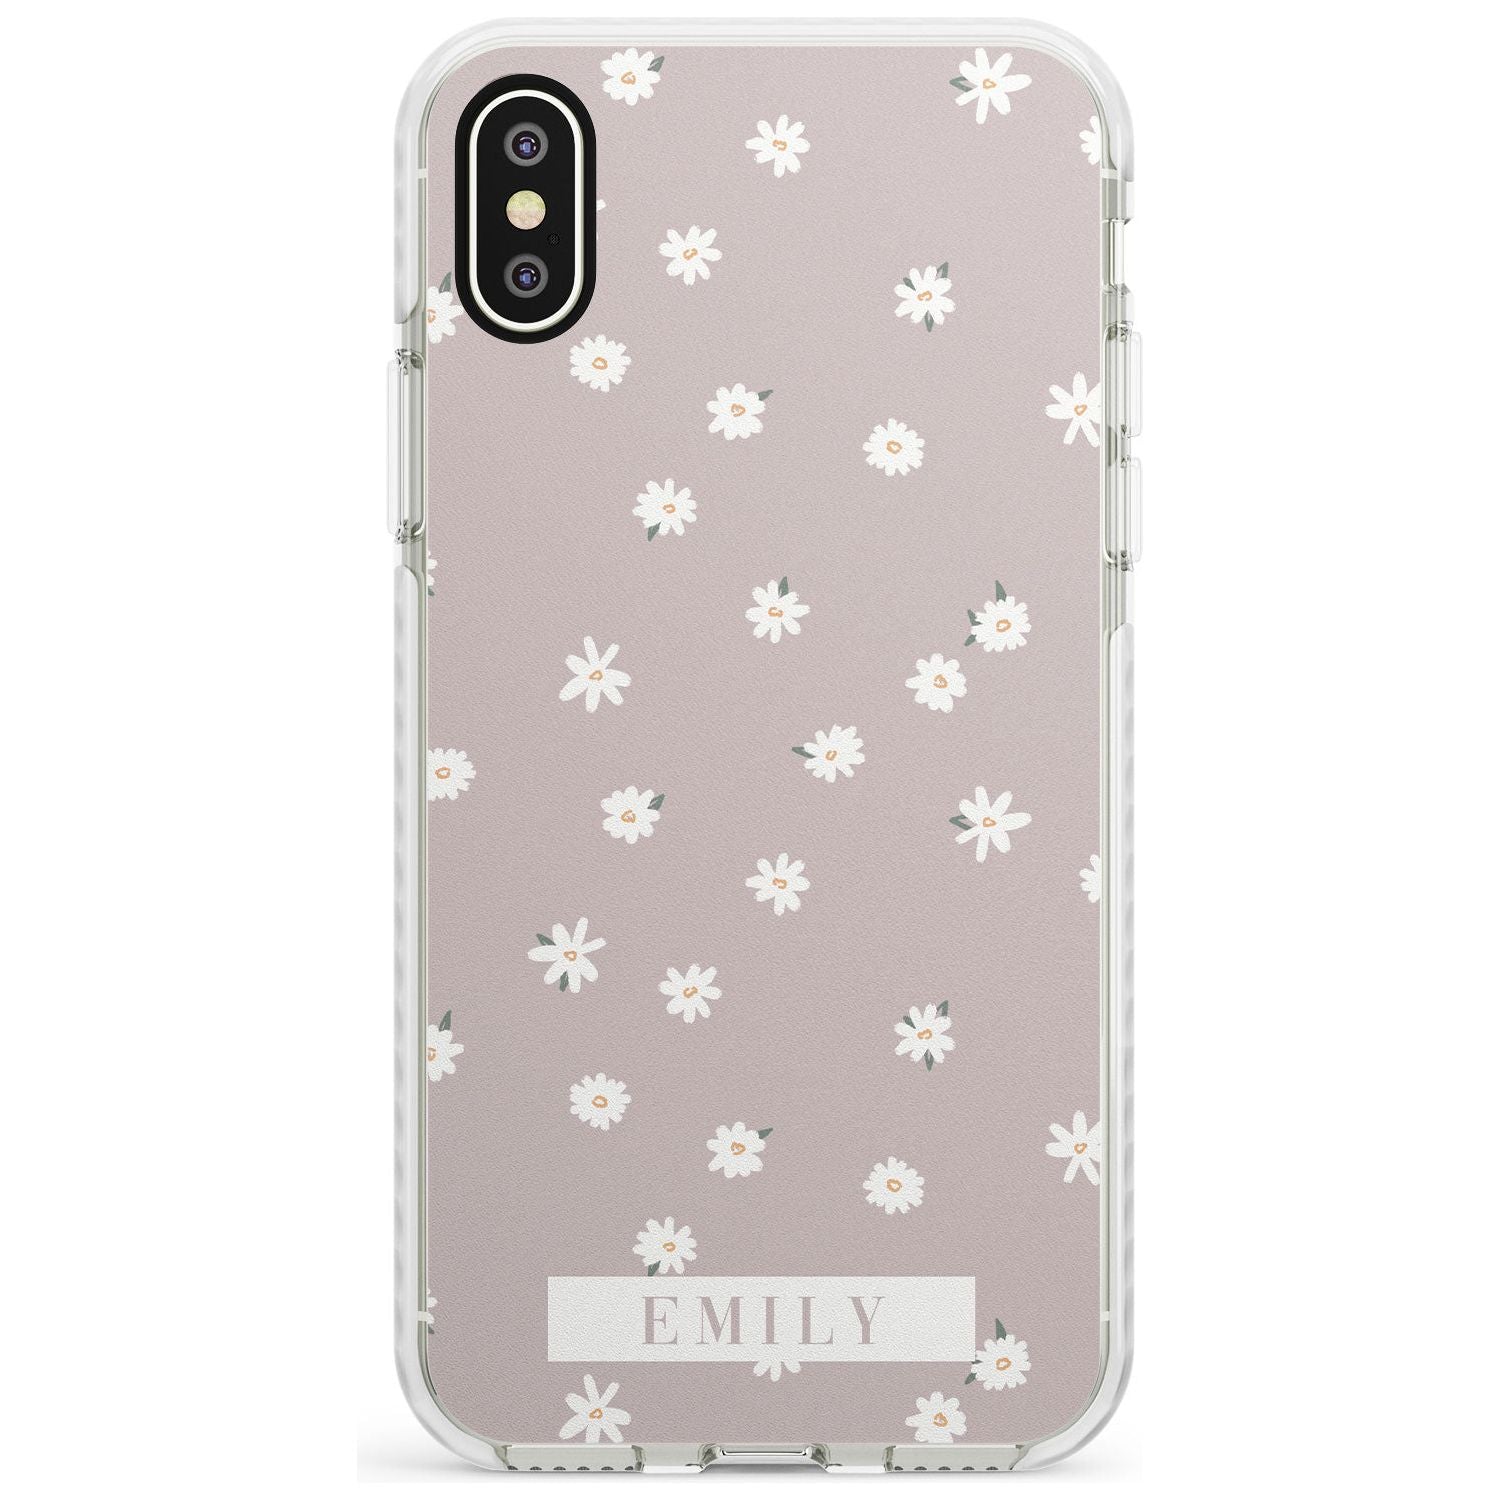 Dusty Rose Custom Impact Phone Case for iPhone X XS Max XR